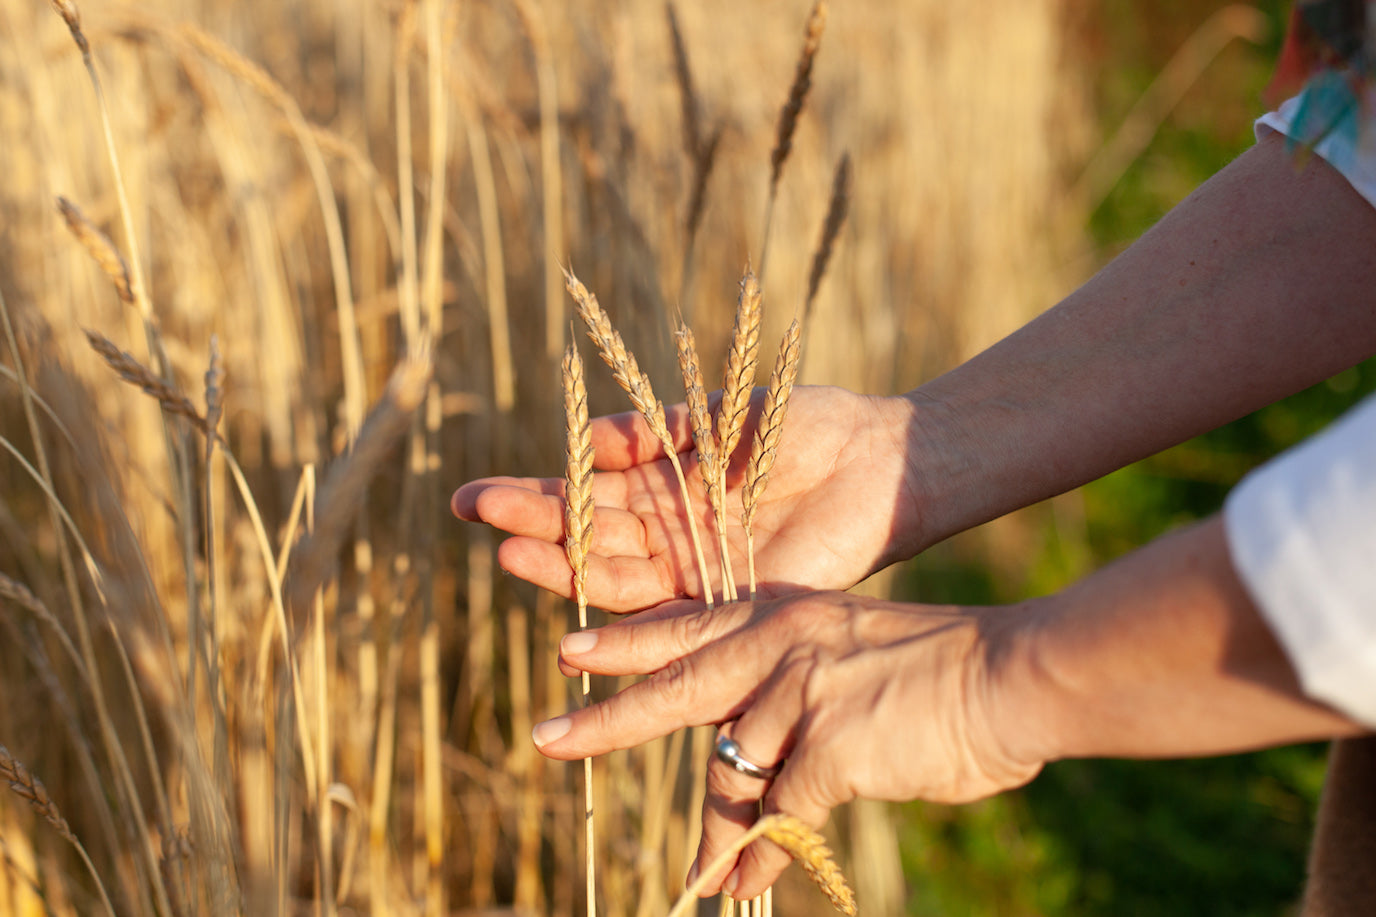 Close up of grain in a field as someone is showing it on their hand